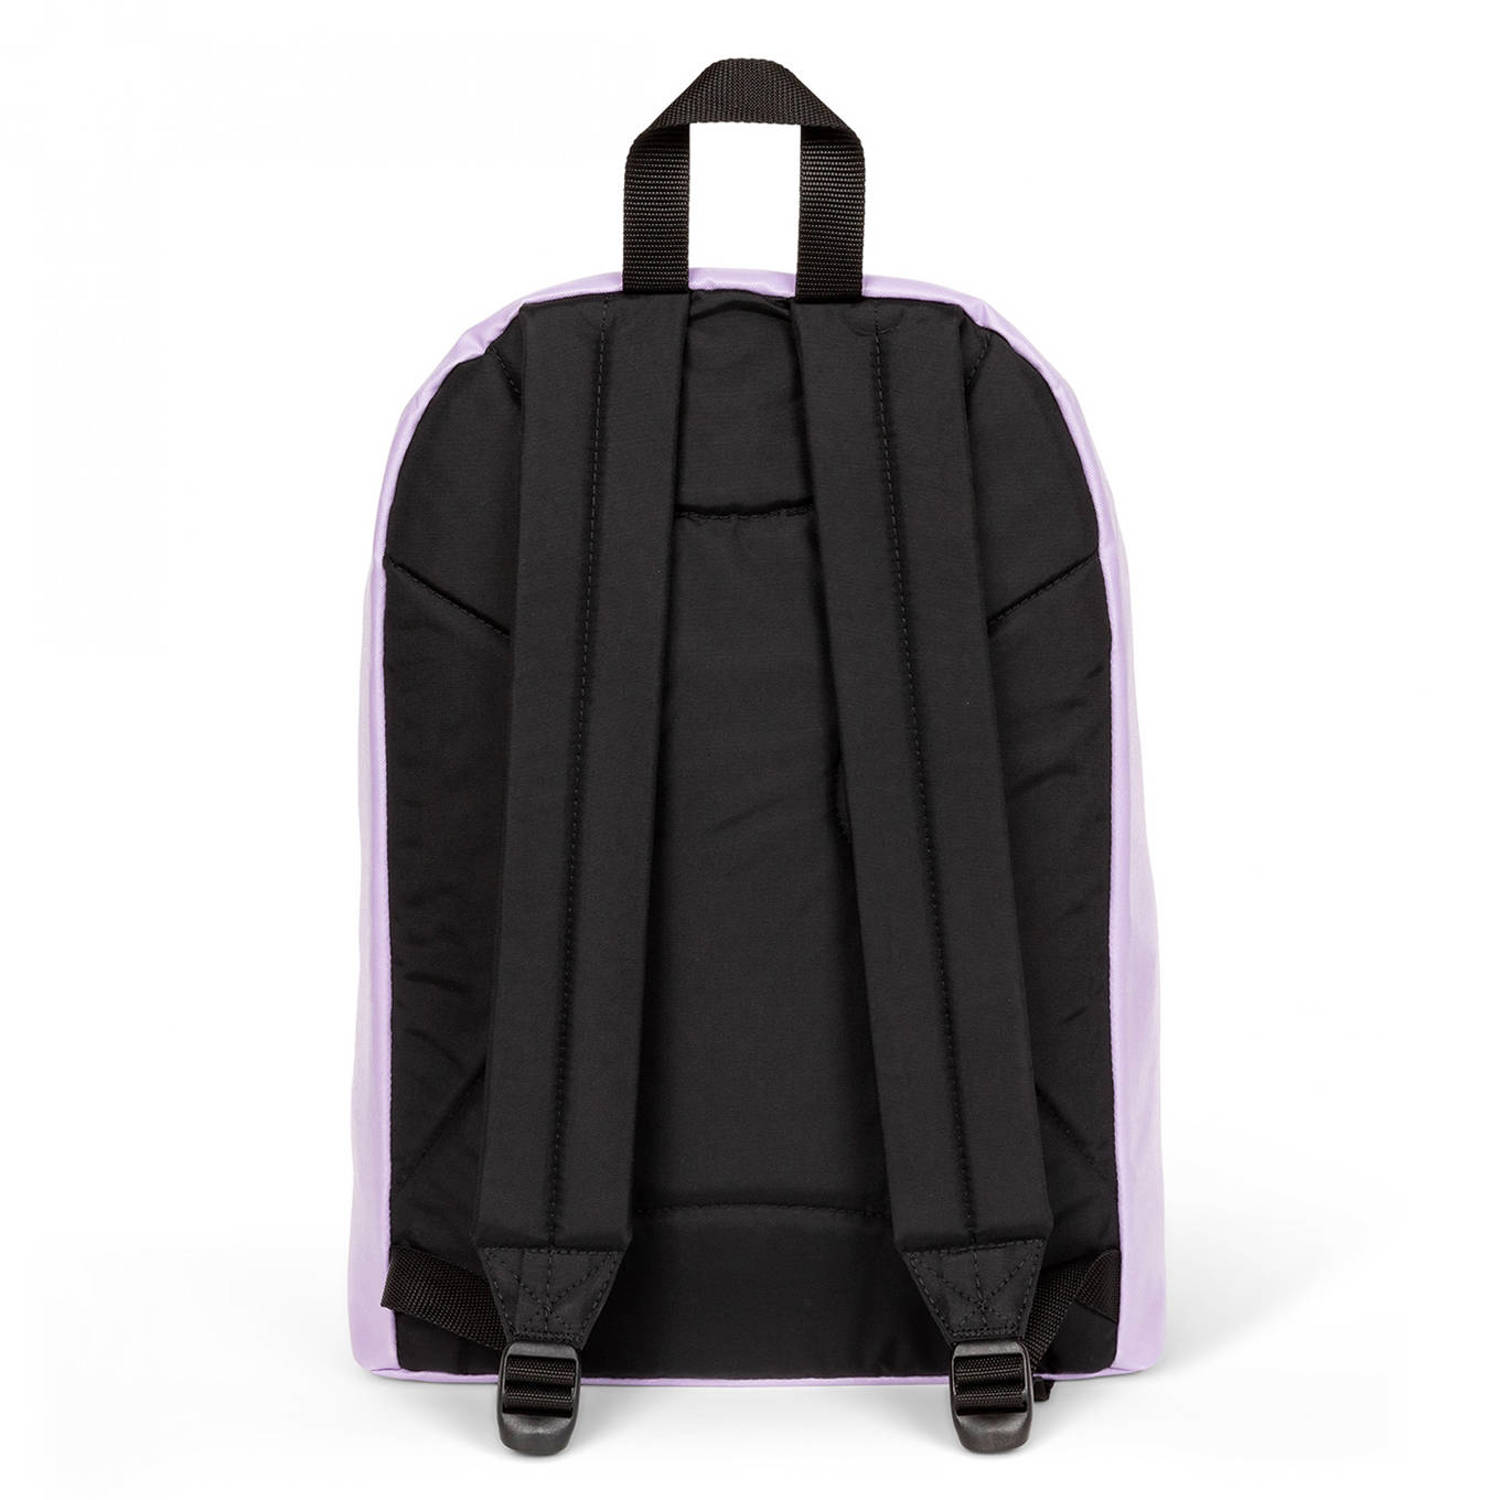 Eastpak rugzak Out of Office glossy lilac